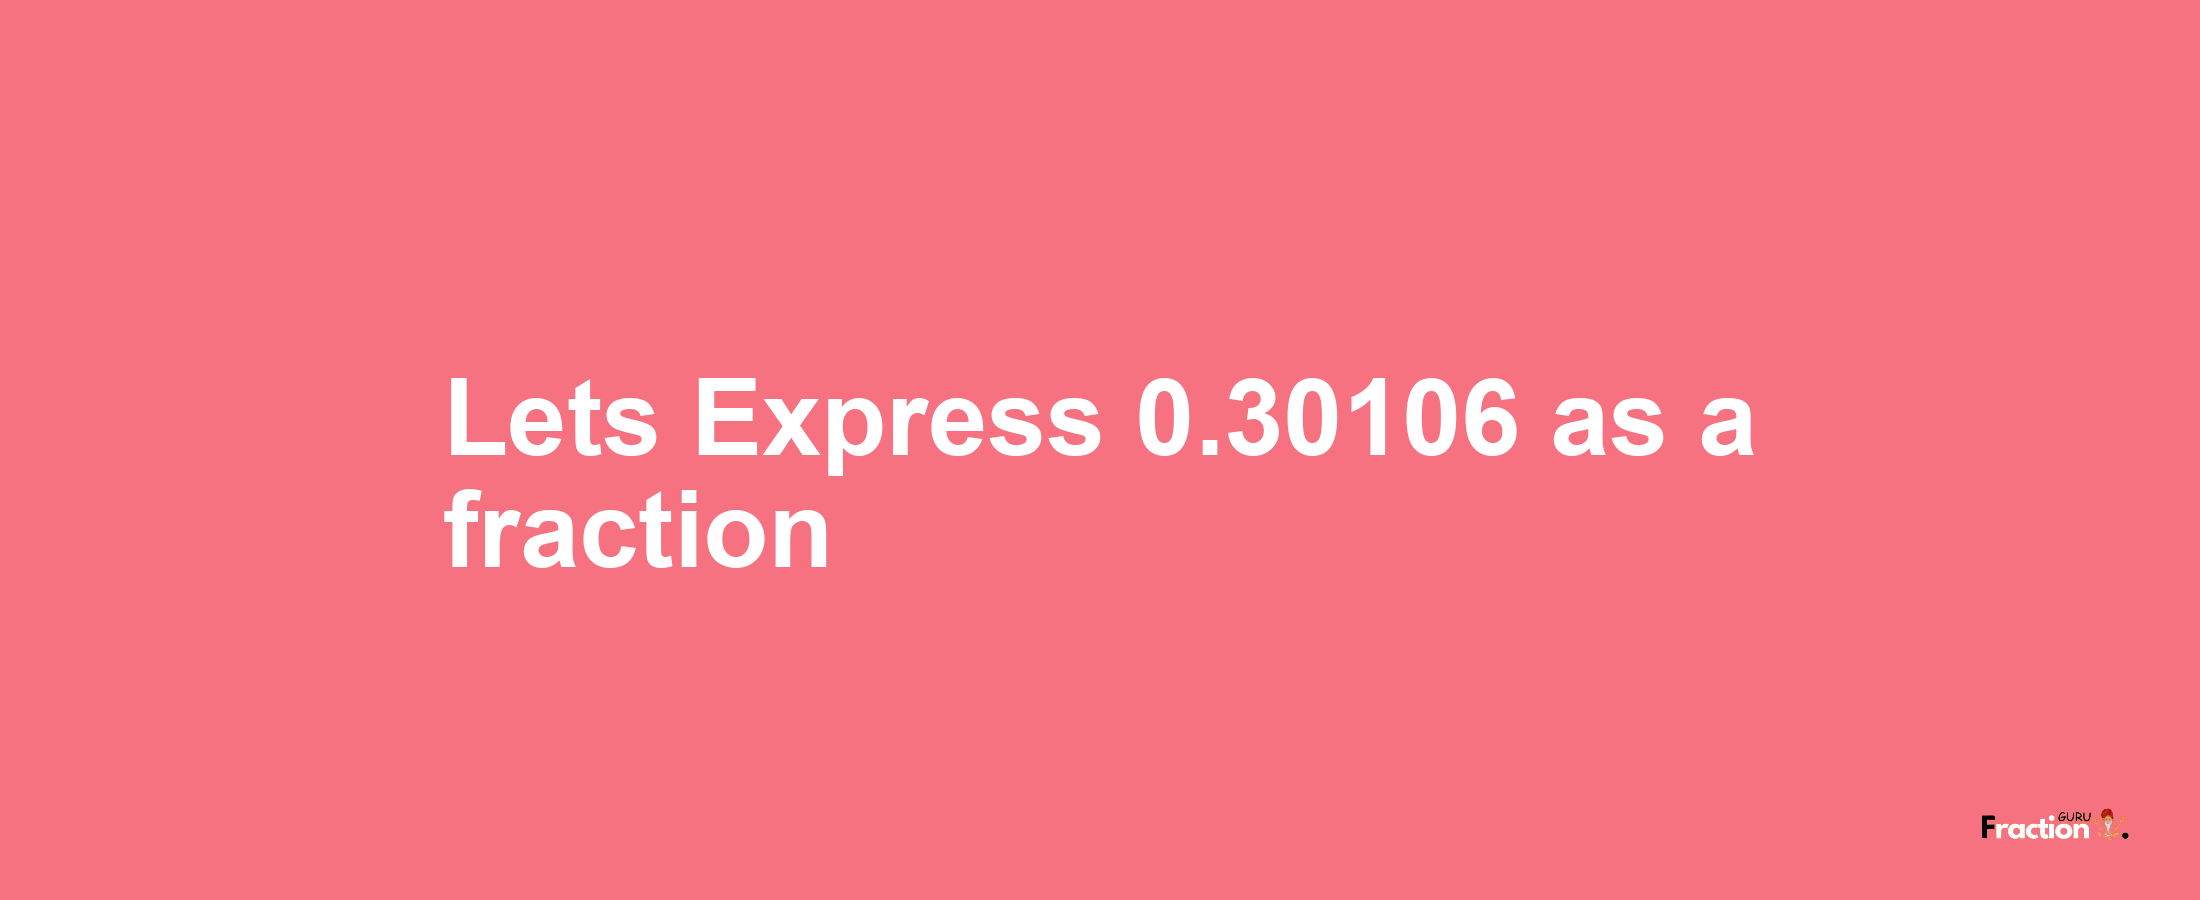 Lets Express 0.30106 as afraction